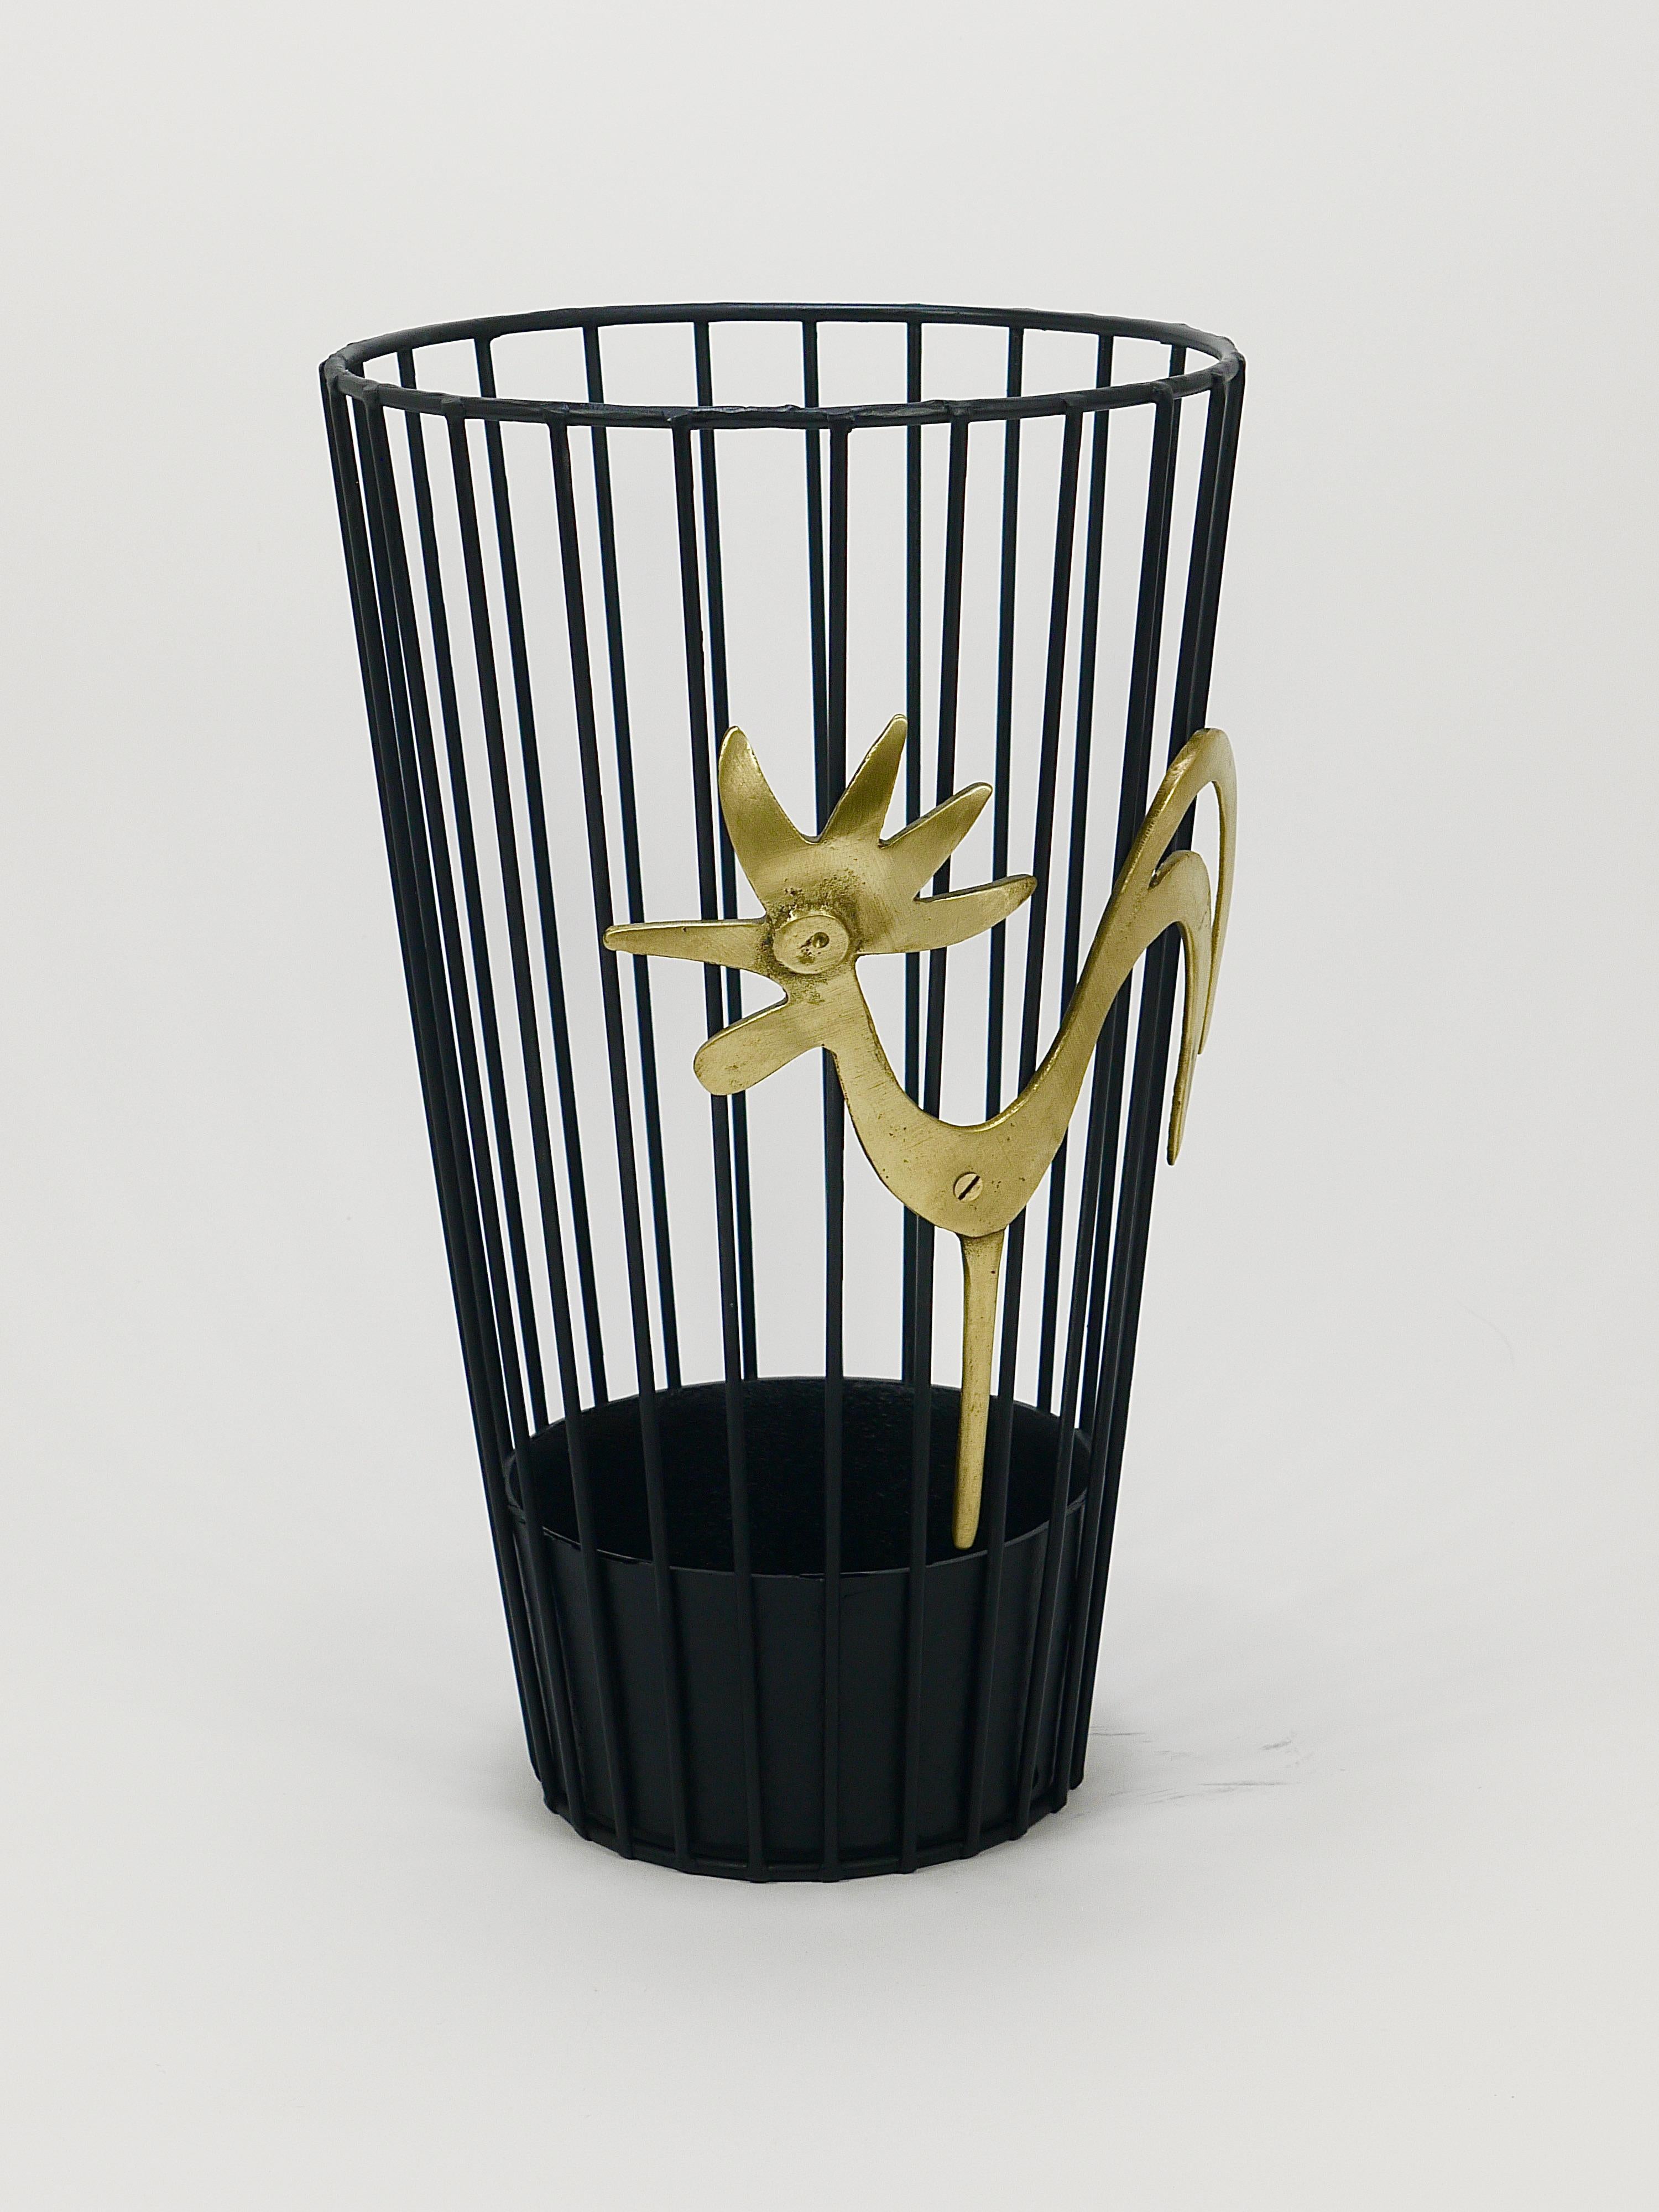 20th Century Walter Bosse Brass Rooster Mid-Century Umbrella Stand for Herta Baller, 1950s For Sale